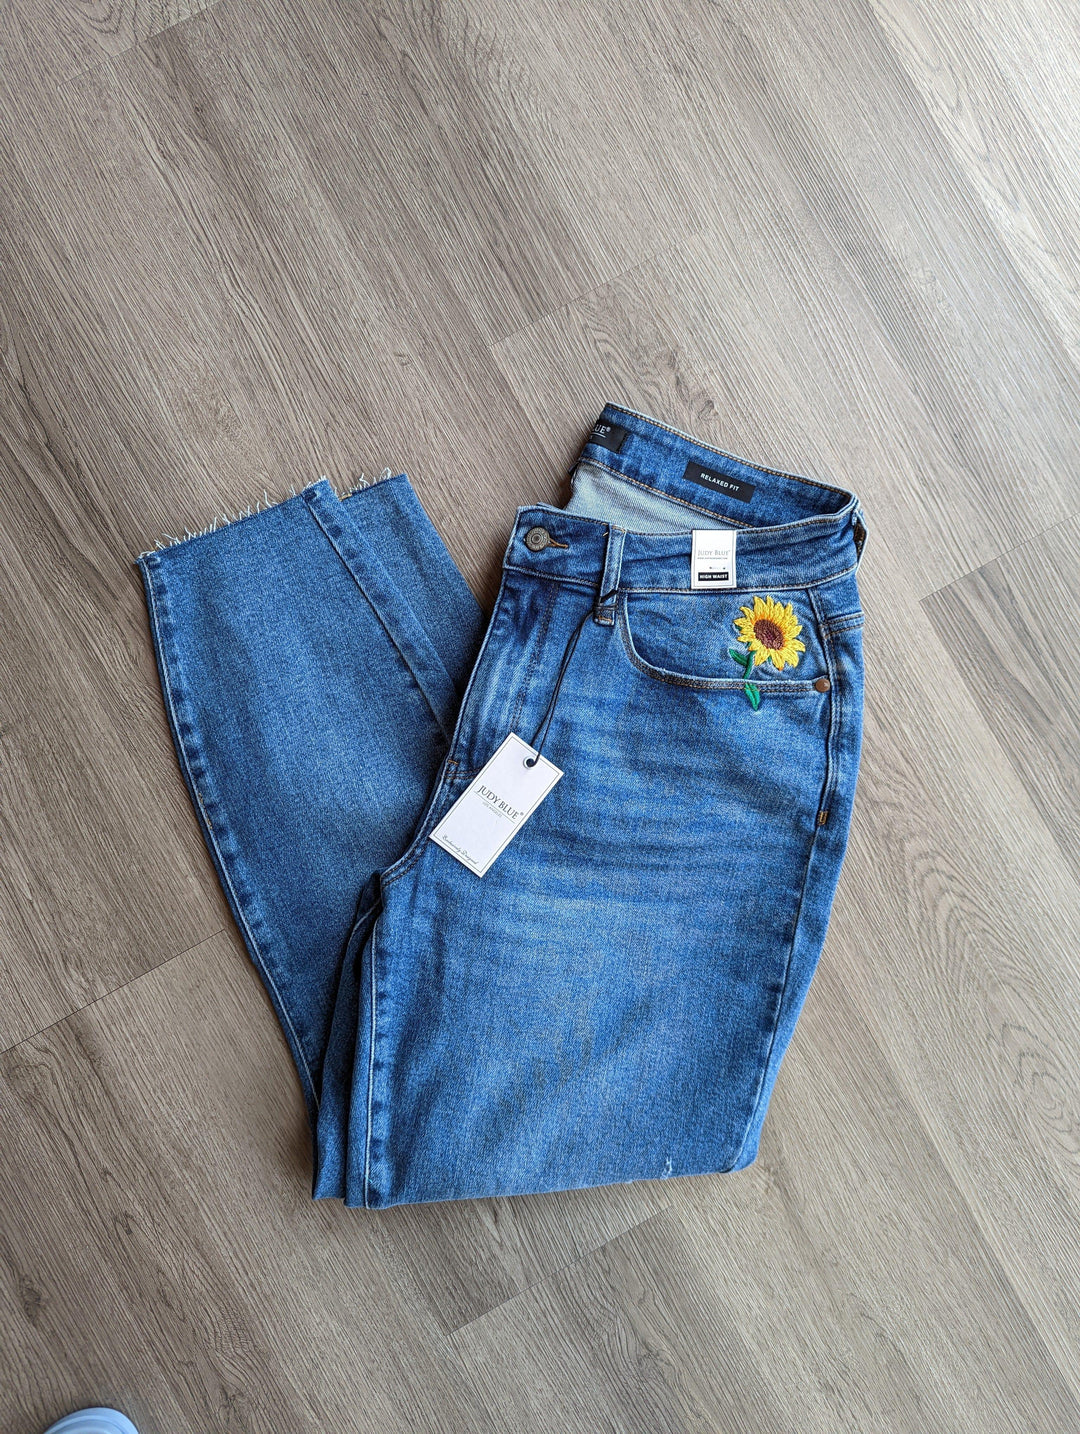 Judy Blue Relaxed fit Sunflower Embroidered Jeans - Esme and Elodie